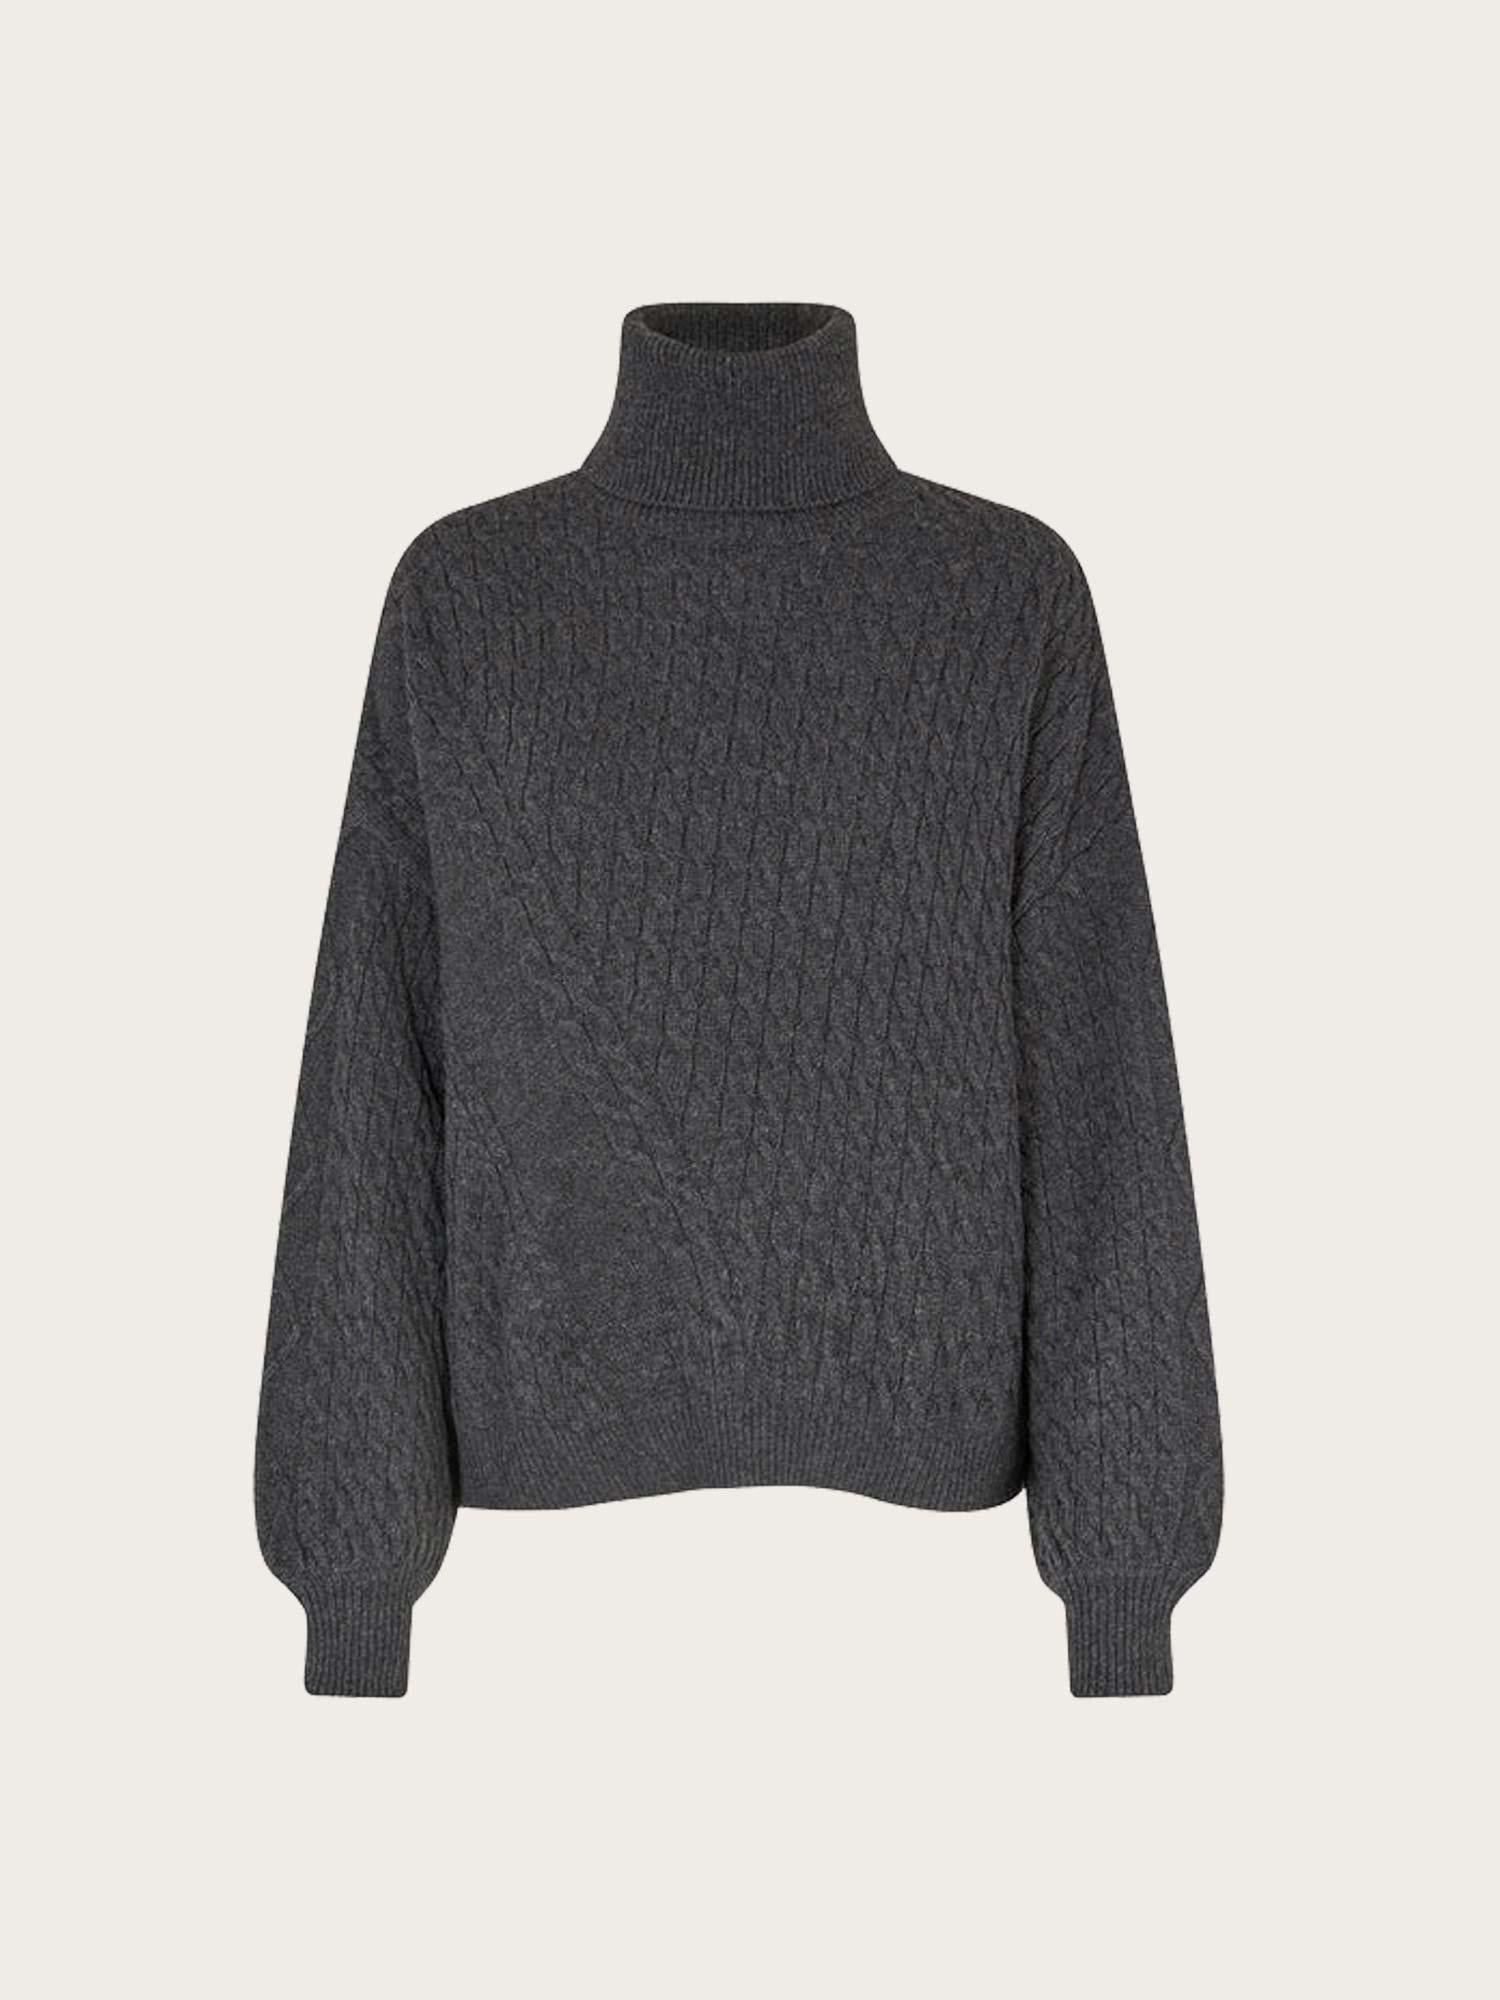 Recycled Wool Mix Rerik Sweater - Charcoal Melange